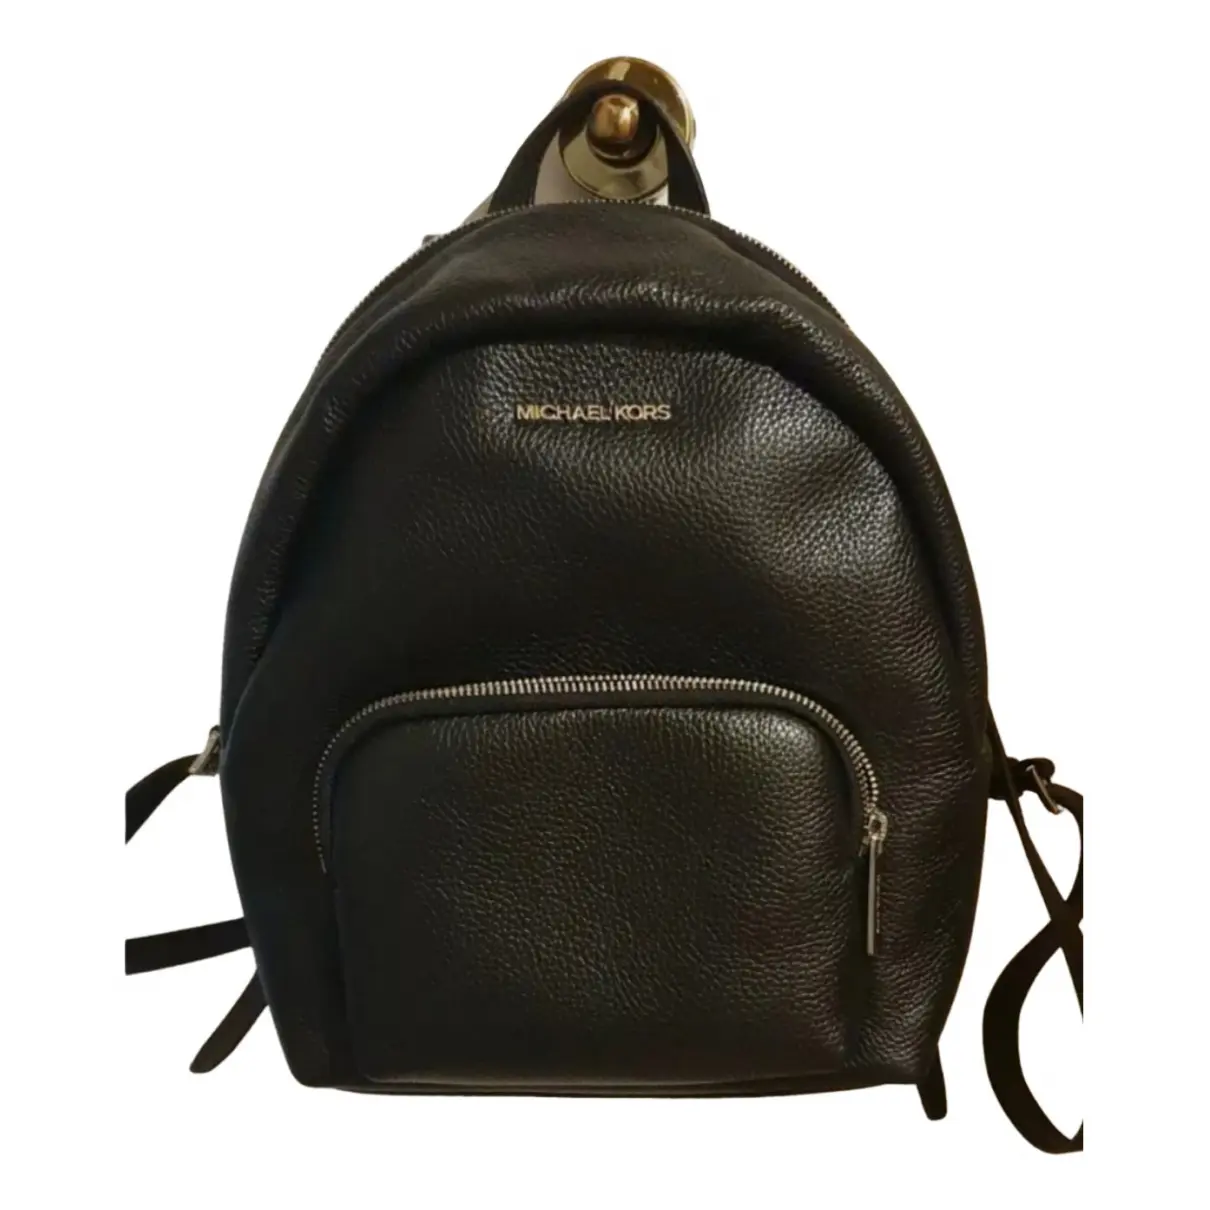 Abbey leather backpack Michael Kors